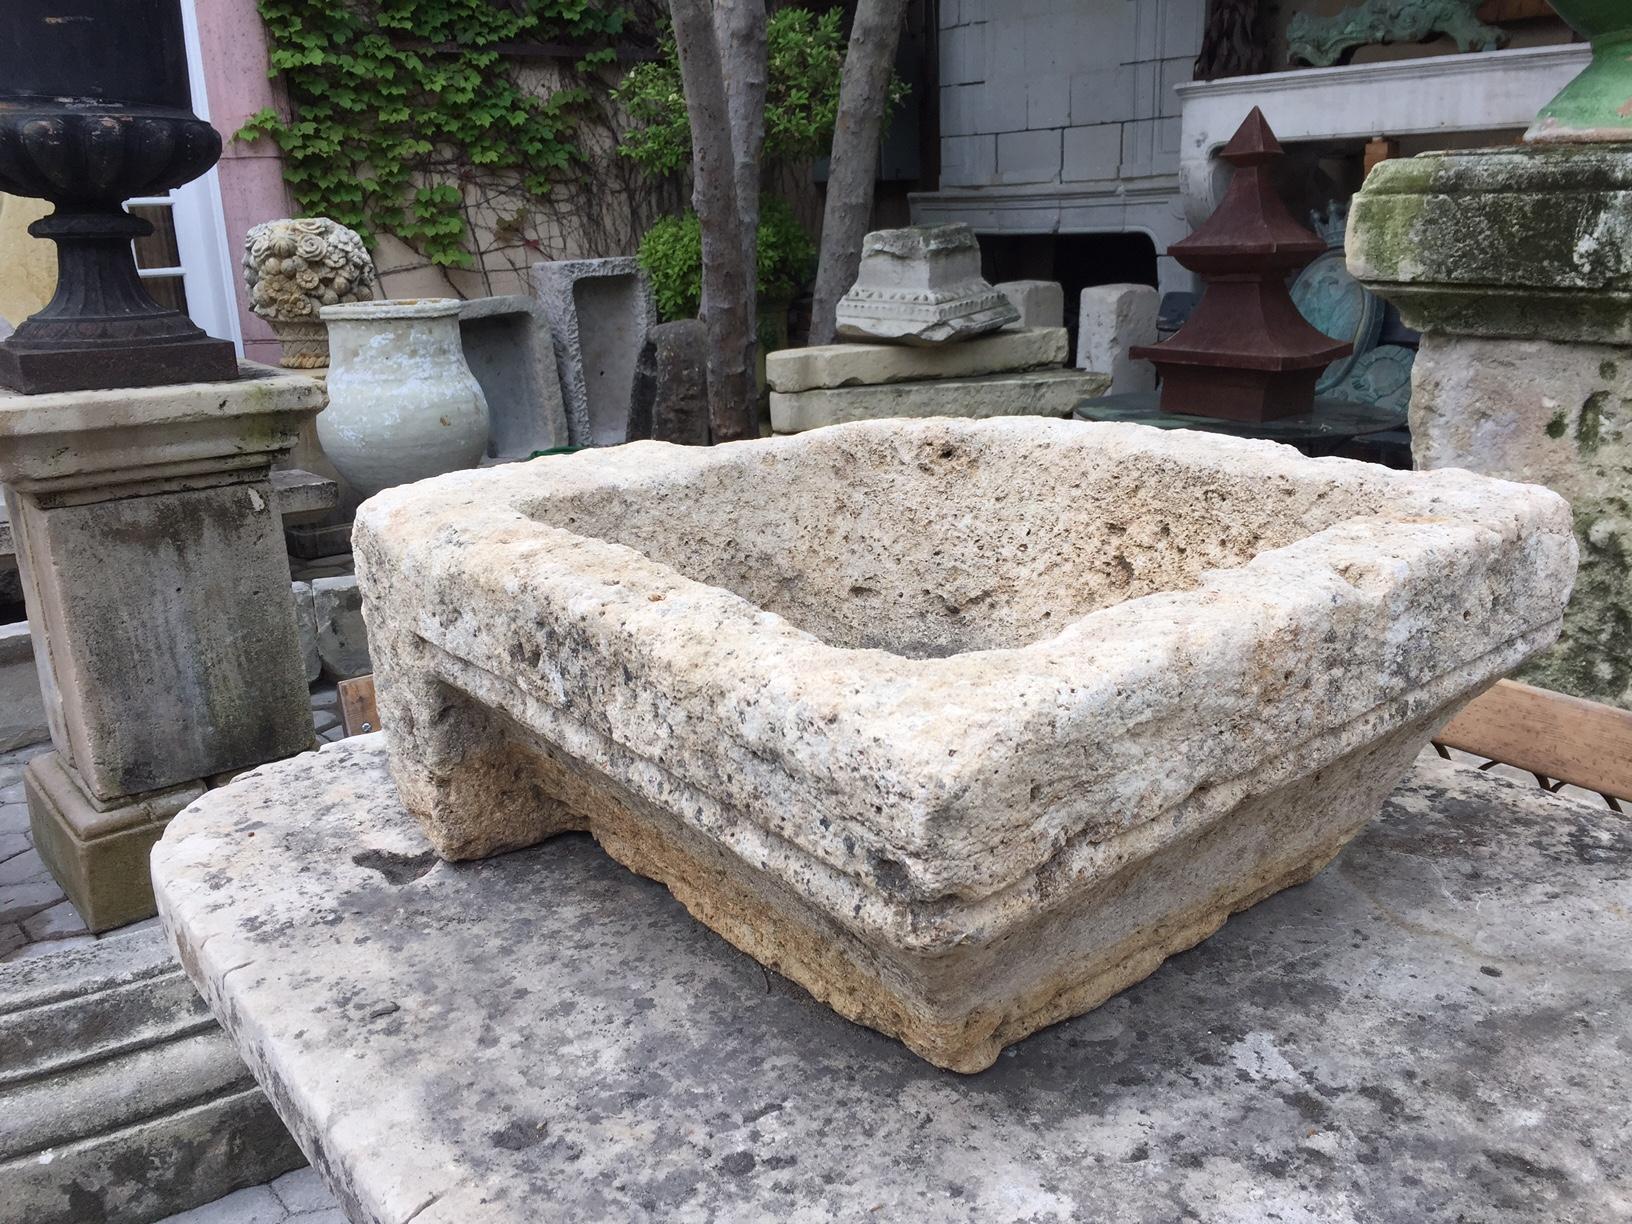 Very rare 18th century limestone Vasque \from a Monastery in the South West of France. Hand carved stone trough basin having a nicely textured surface. It could be standing alone as a decorative object or it could be used as a fountain base or